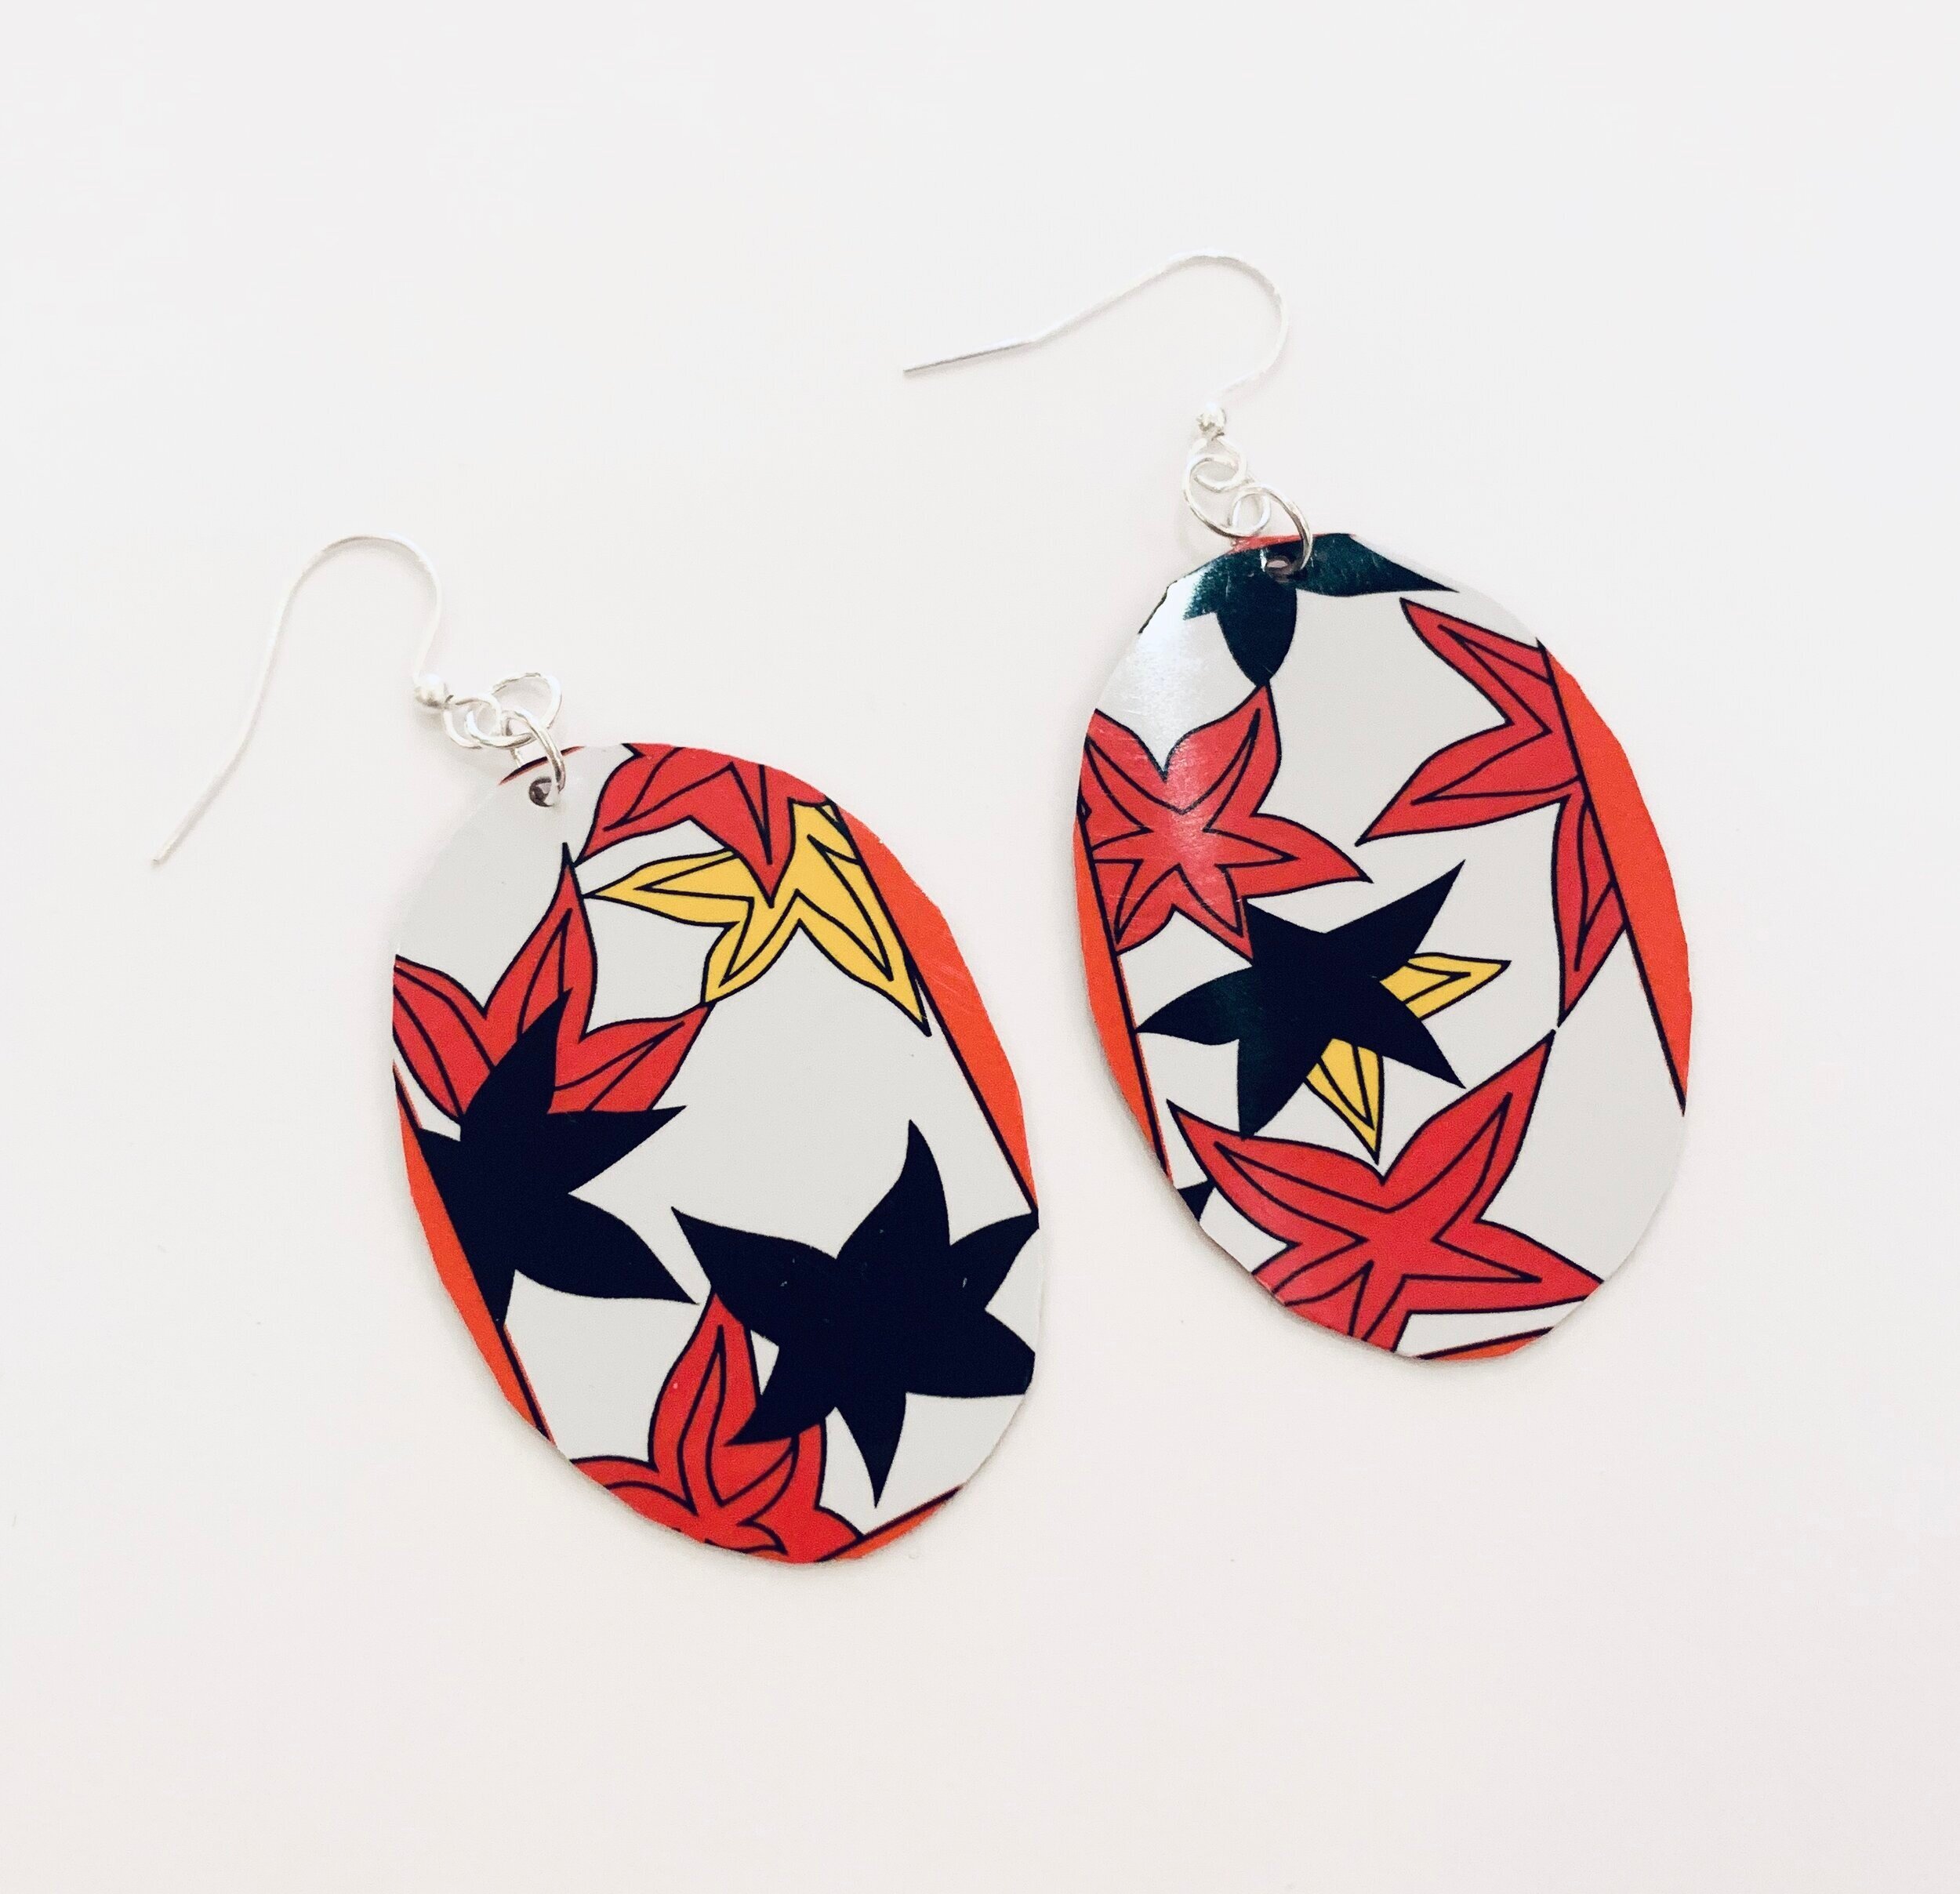 What makes Hanafuda earrings stand out?